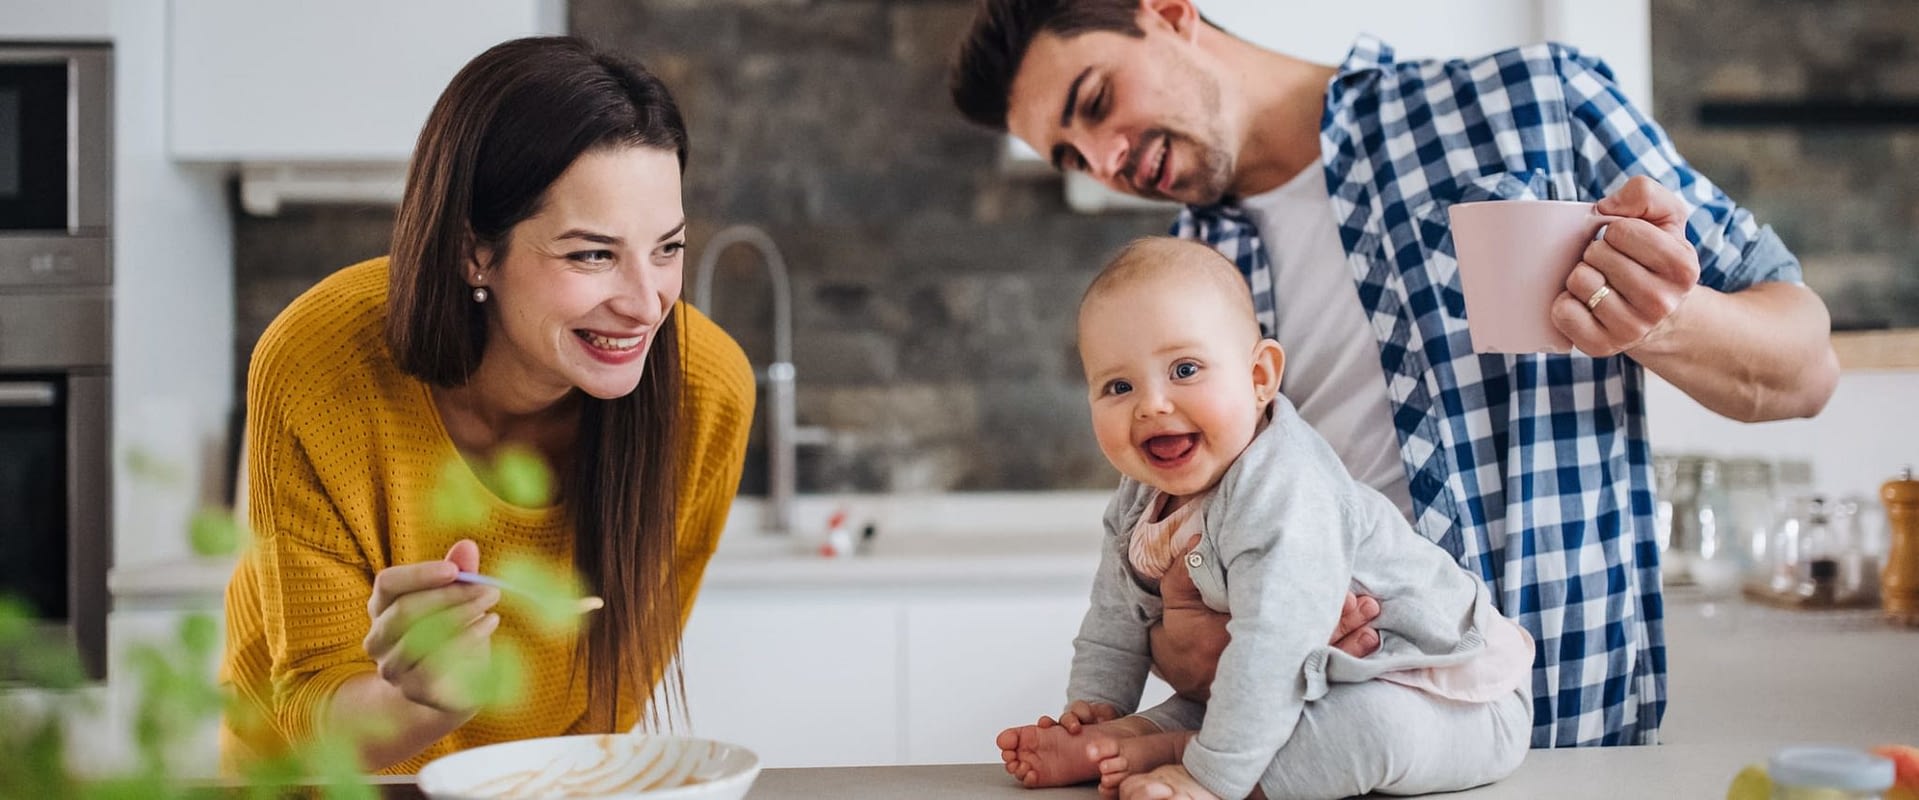 Happy Couple With Baby on Kitchen Counter